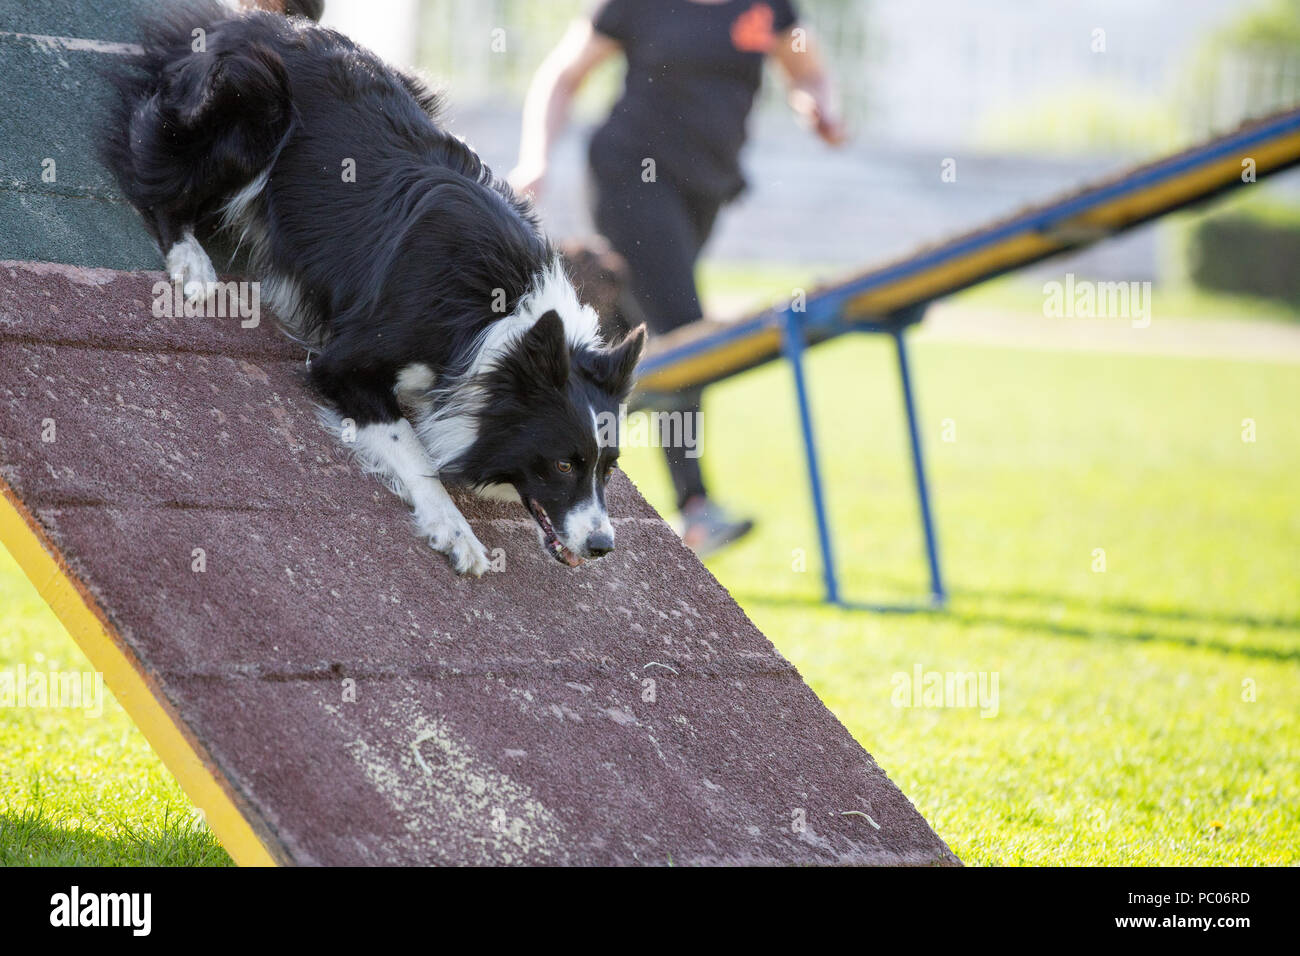 Dog goes down from A-frame in agility competition Stock Photo